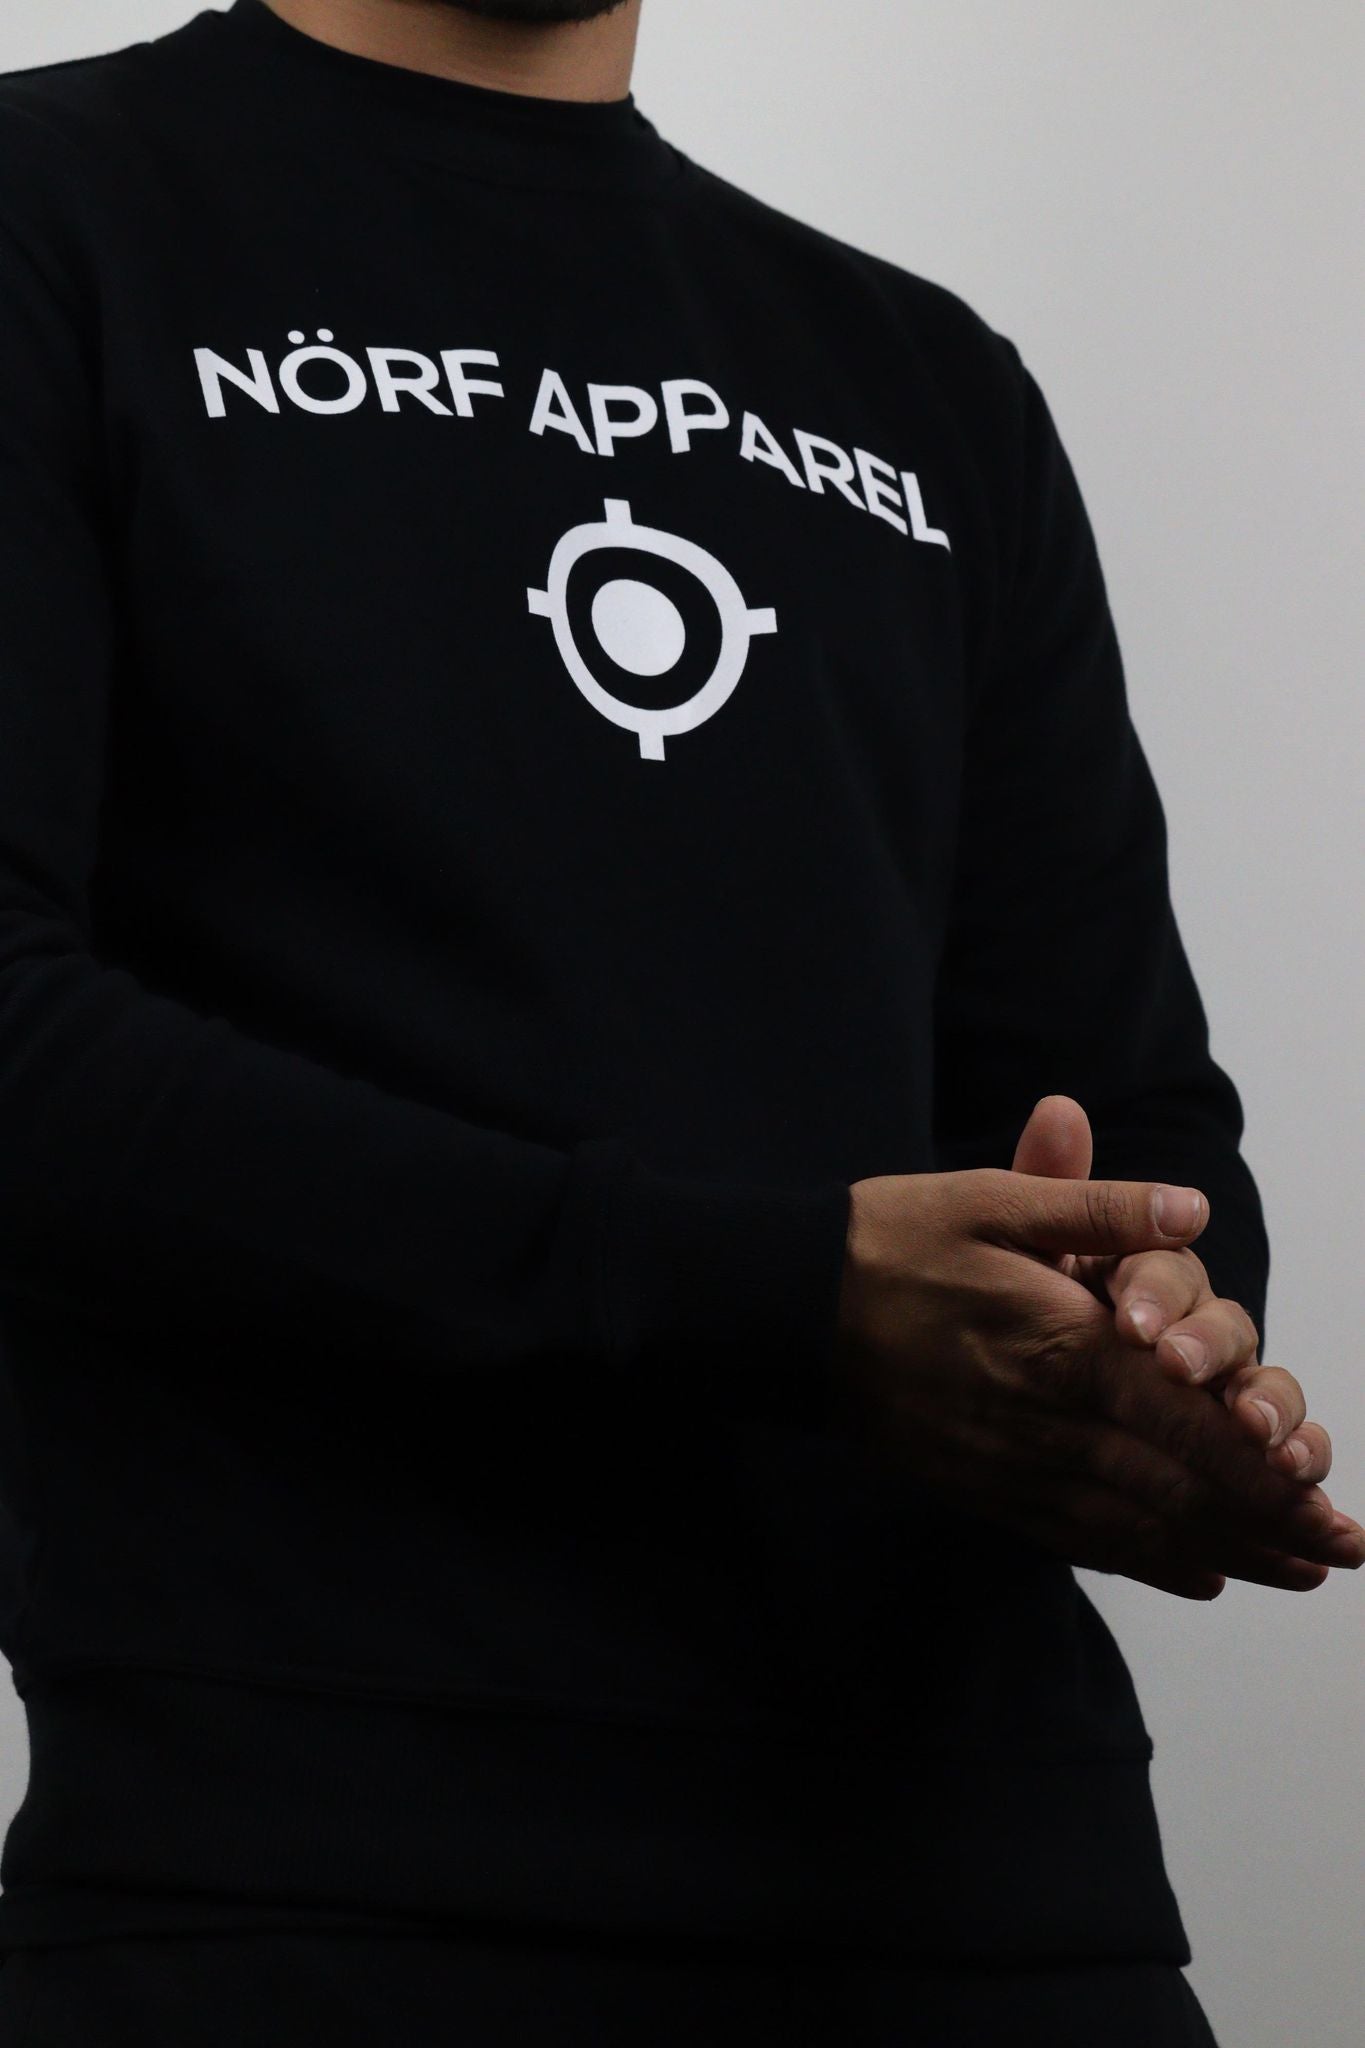 NÖRF APPAREL FITTED CREW NECK